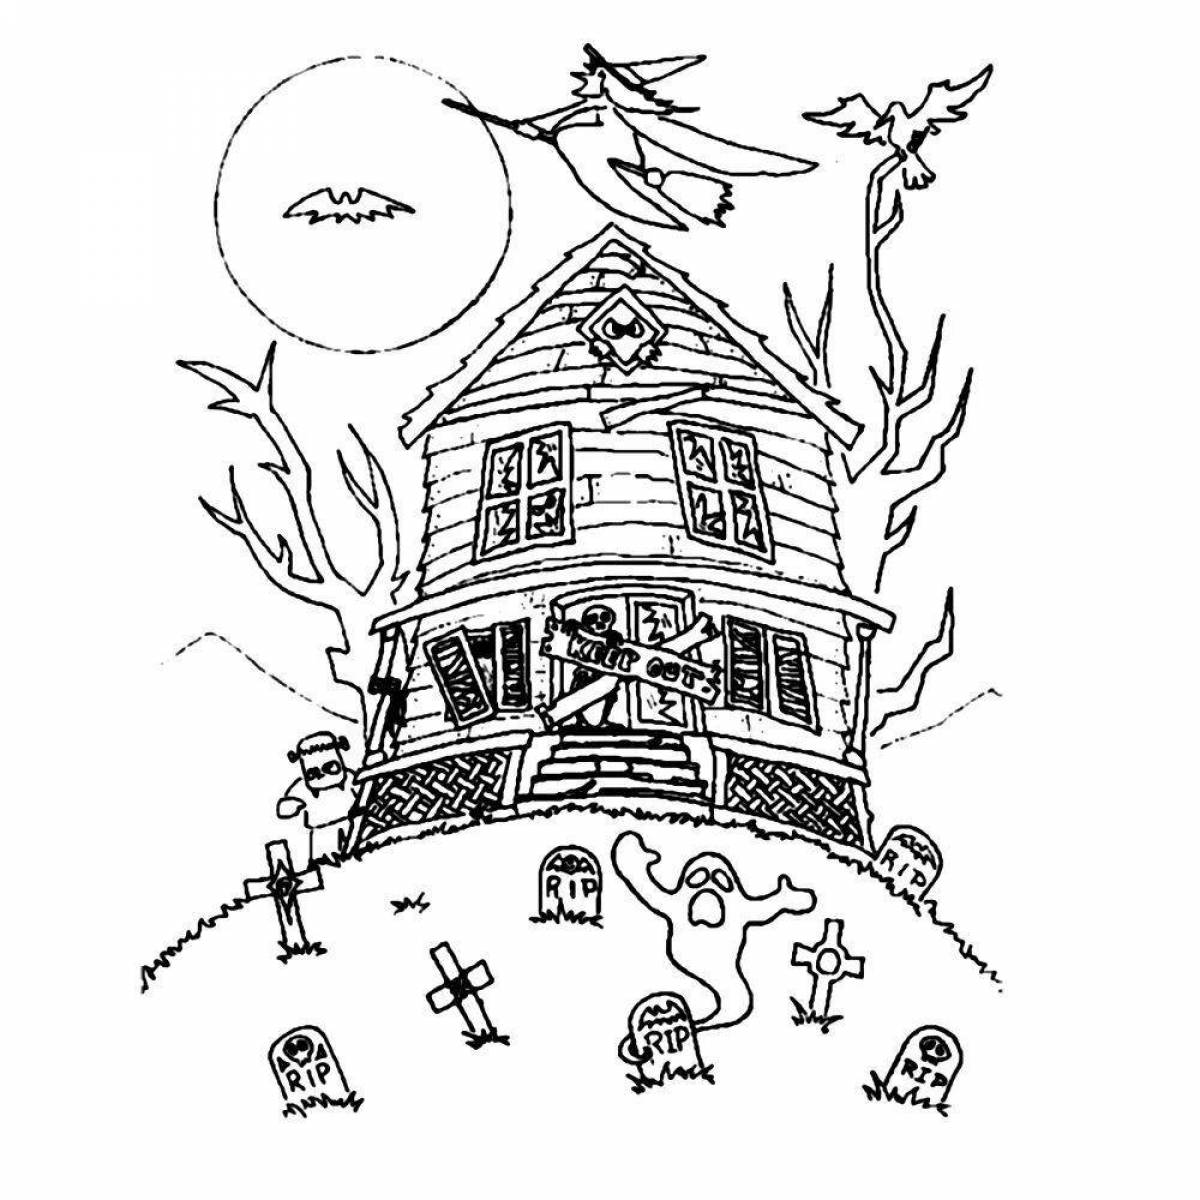 Nerving halloween house coloring page